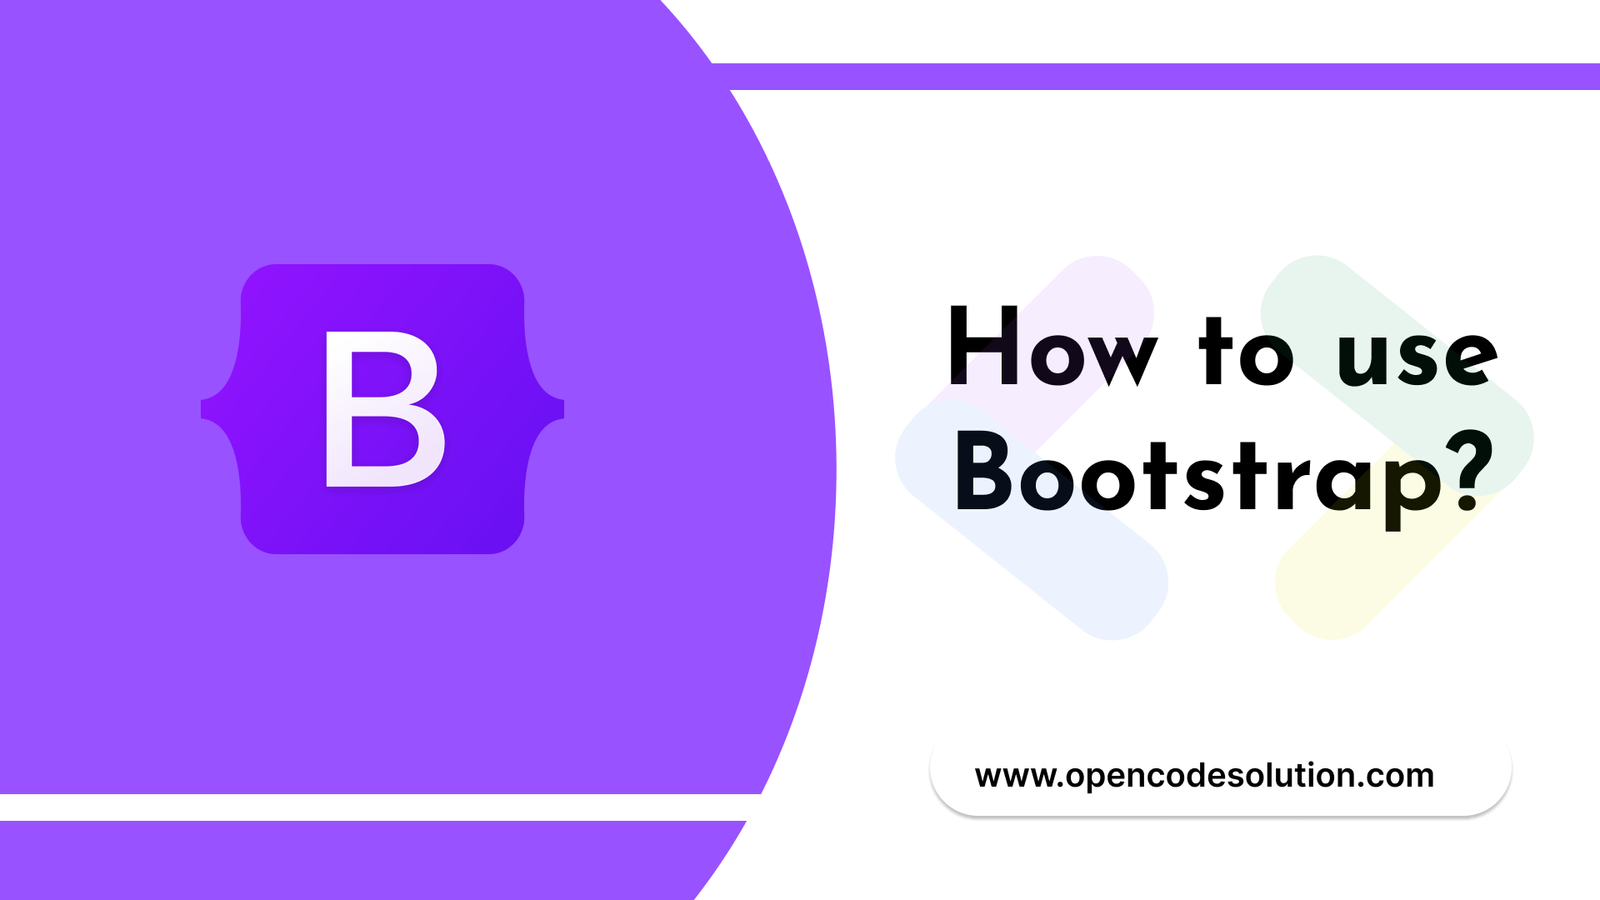 How to use Bootstrap?